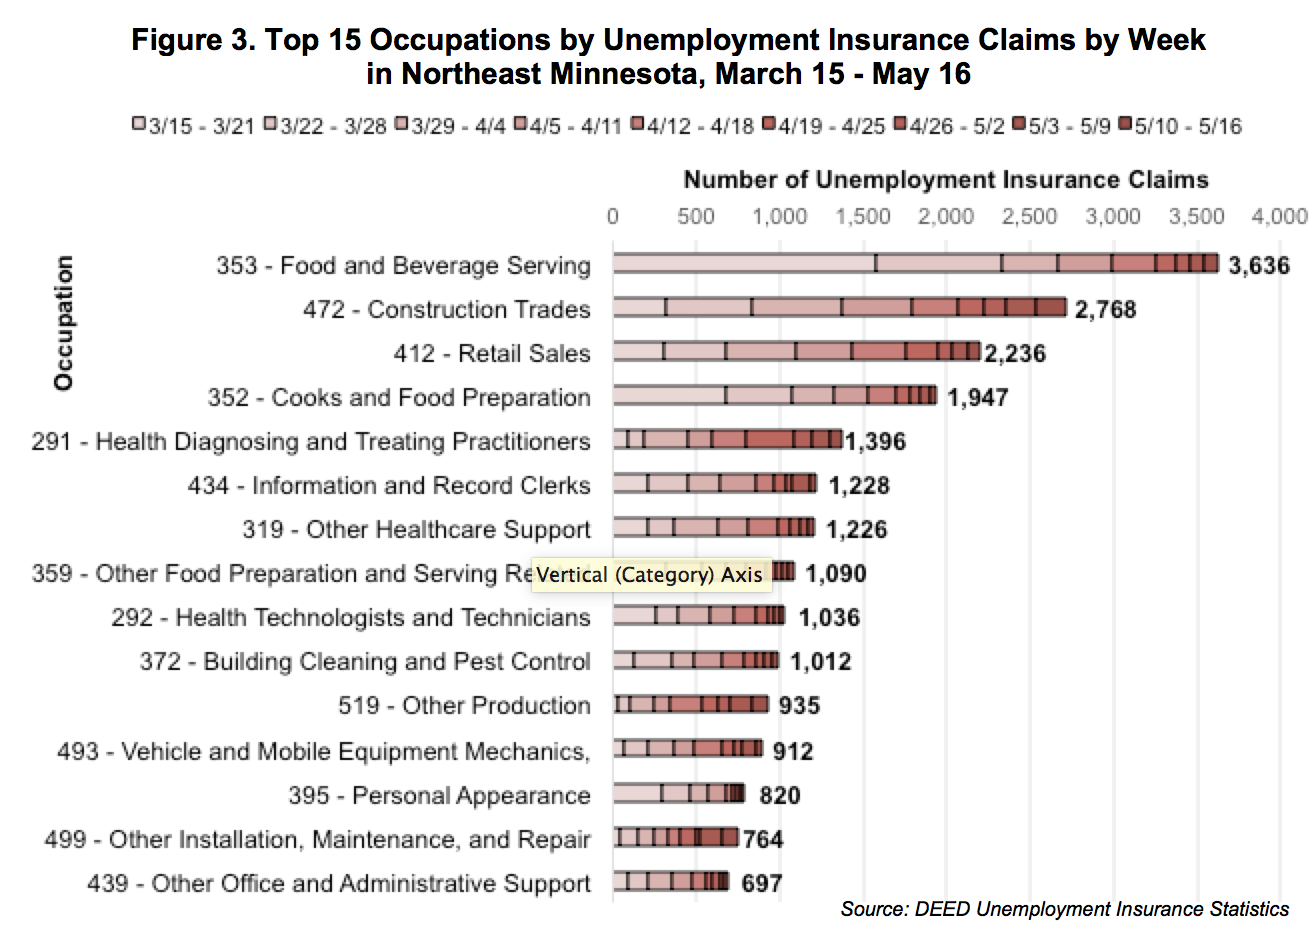 Figure 3. Top 15 Occupations by Unemployment Insurance Claims by Week in NE Minnesota